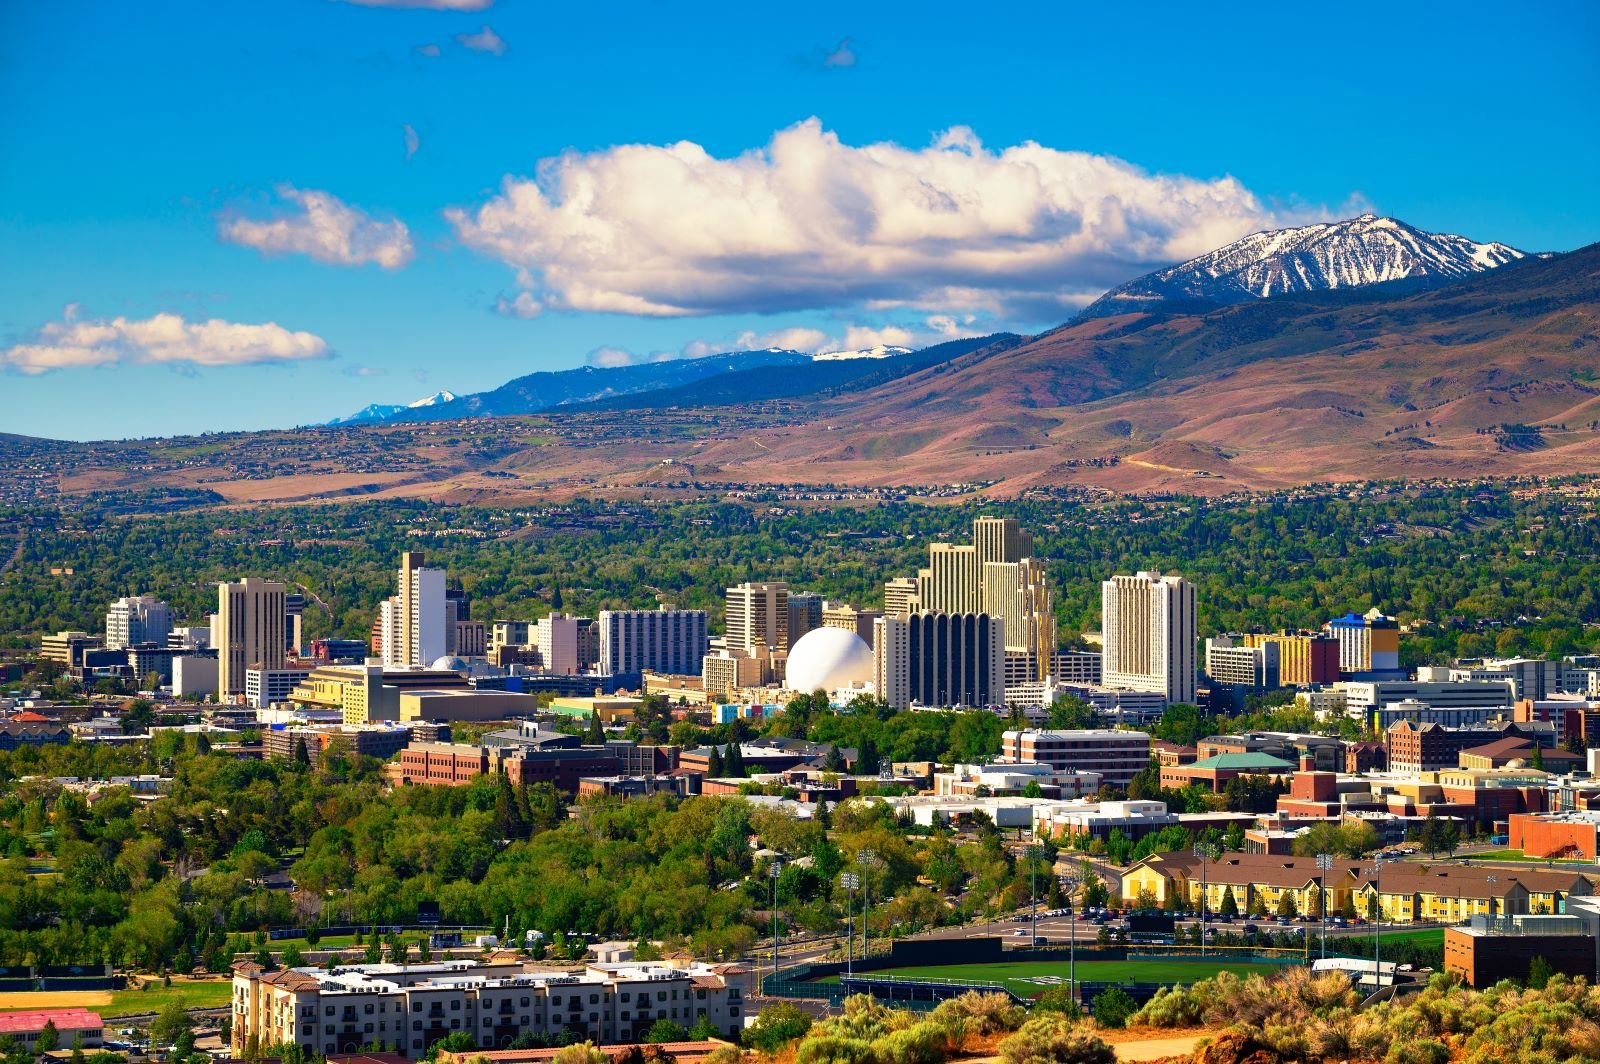 <p>Nevada ranks 25th overall, primarily due to its low rankings in healthcare and crime. The state is ranked 23rd in healthcare quality and 40th in crime, making it a less safe and healthy place for retirees. While Nevada’s cost of living is moderate (ranked 29th), the high crime rates and poor healthcare services outweigh this benefit.</p>